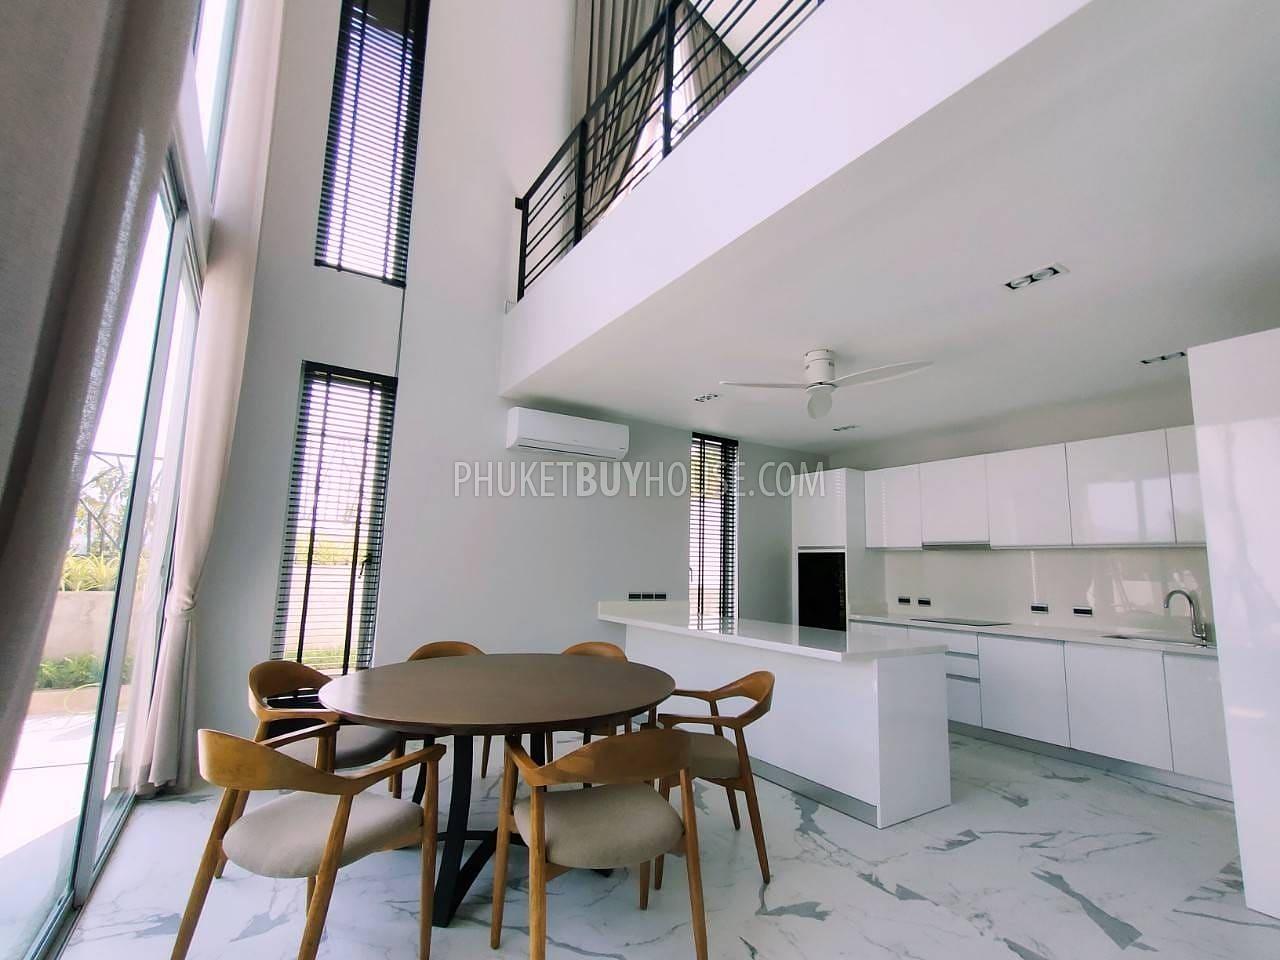 BAN6280: Last Villa for sale! New project of Villas in Bang Tao area. Photo #13